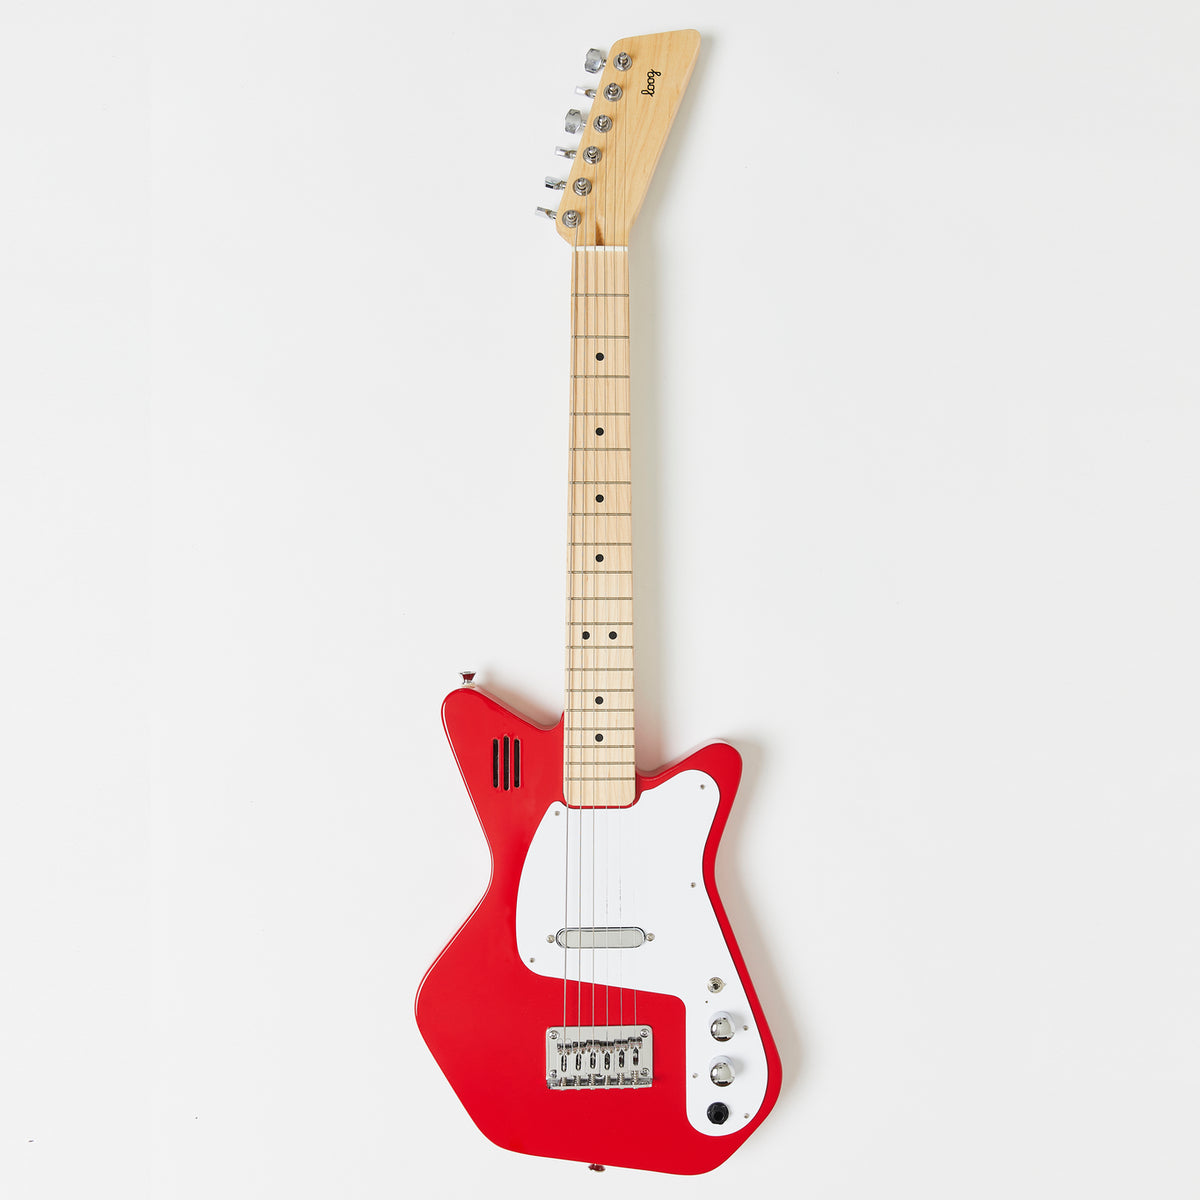 red-guitar-strap-gig-bag red-guitar-strap-wall-hanger red-guitar-strap-stand